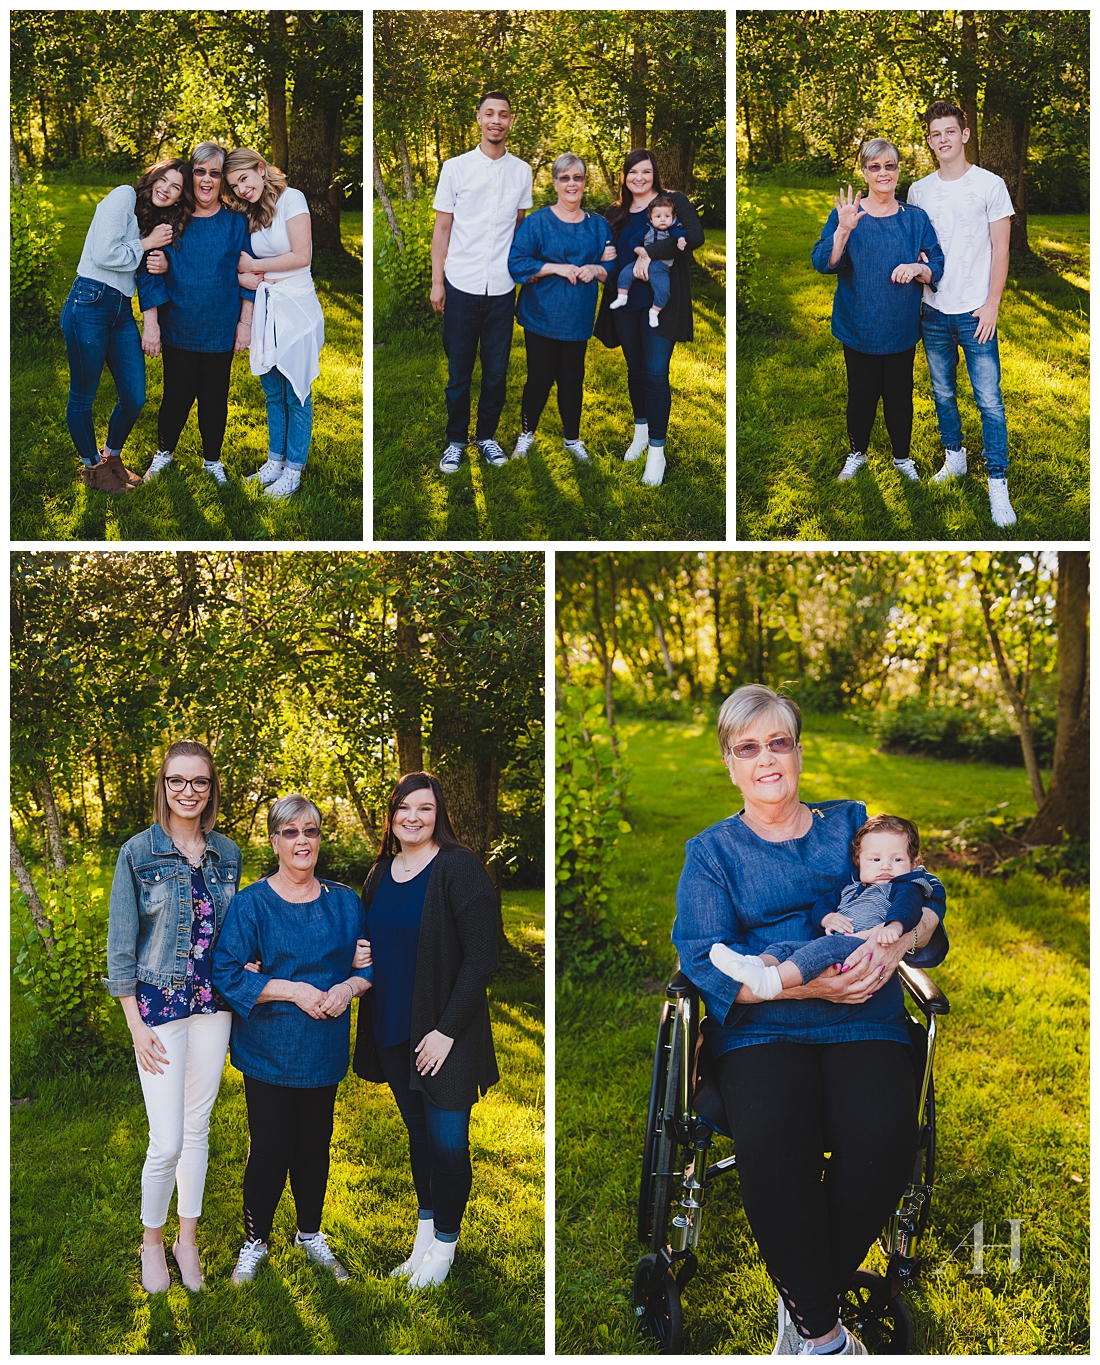 Family Portraits with Multiple Generations | Outfit Ideas, How to Wear Blue for Portraits, Styling Jeans, Tacoma Family Portrait Inspiration | Photographed by Tacoma Senior Photographer Amanda Howse